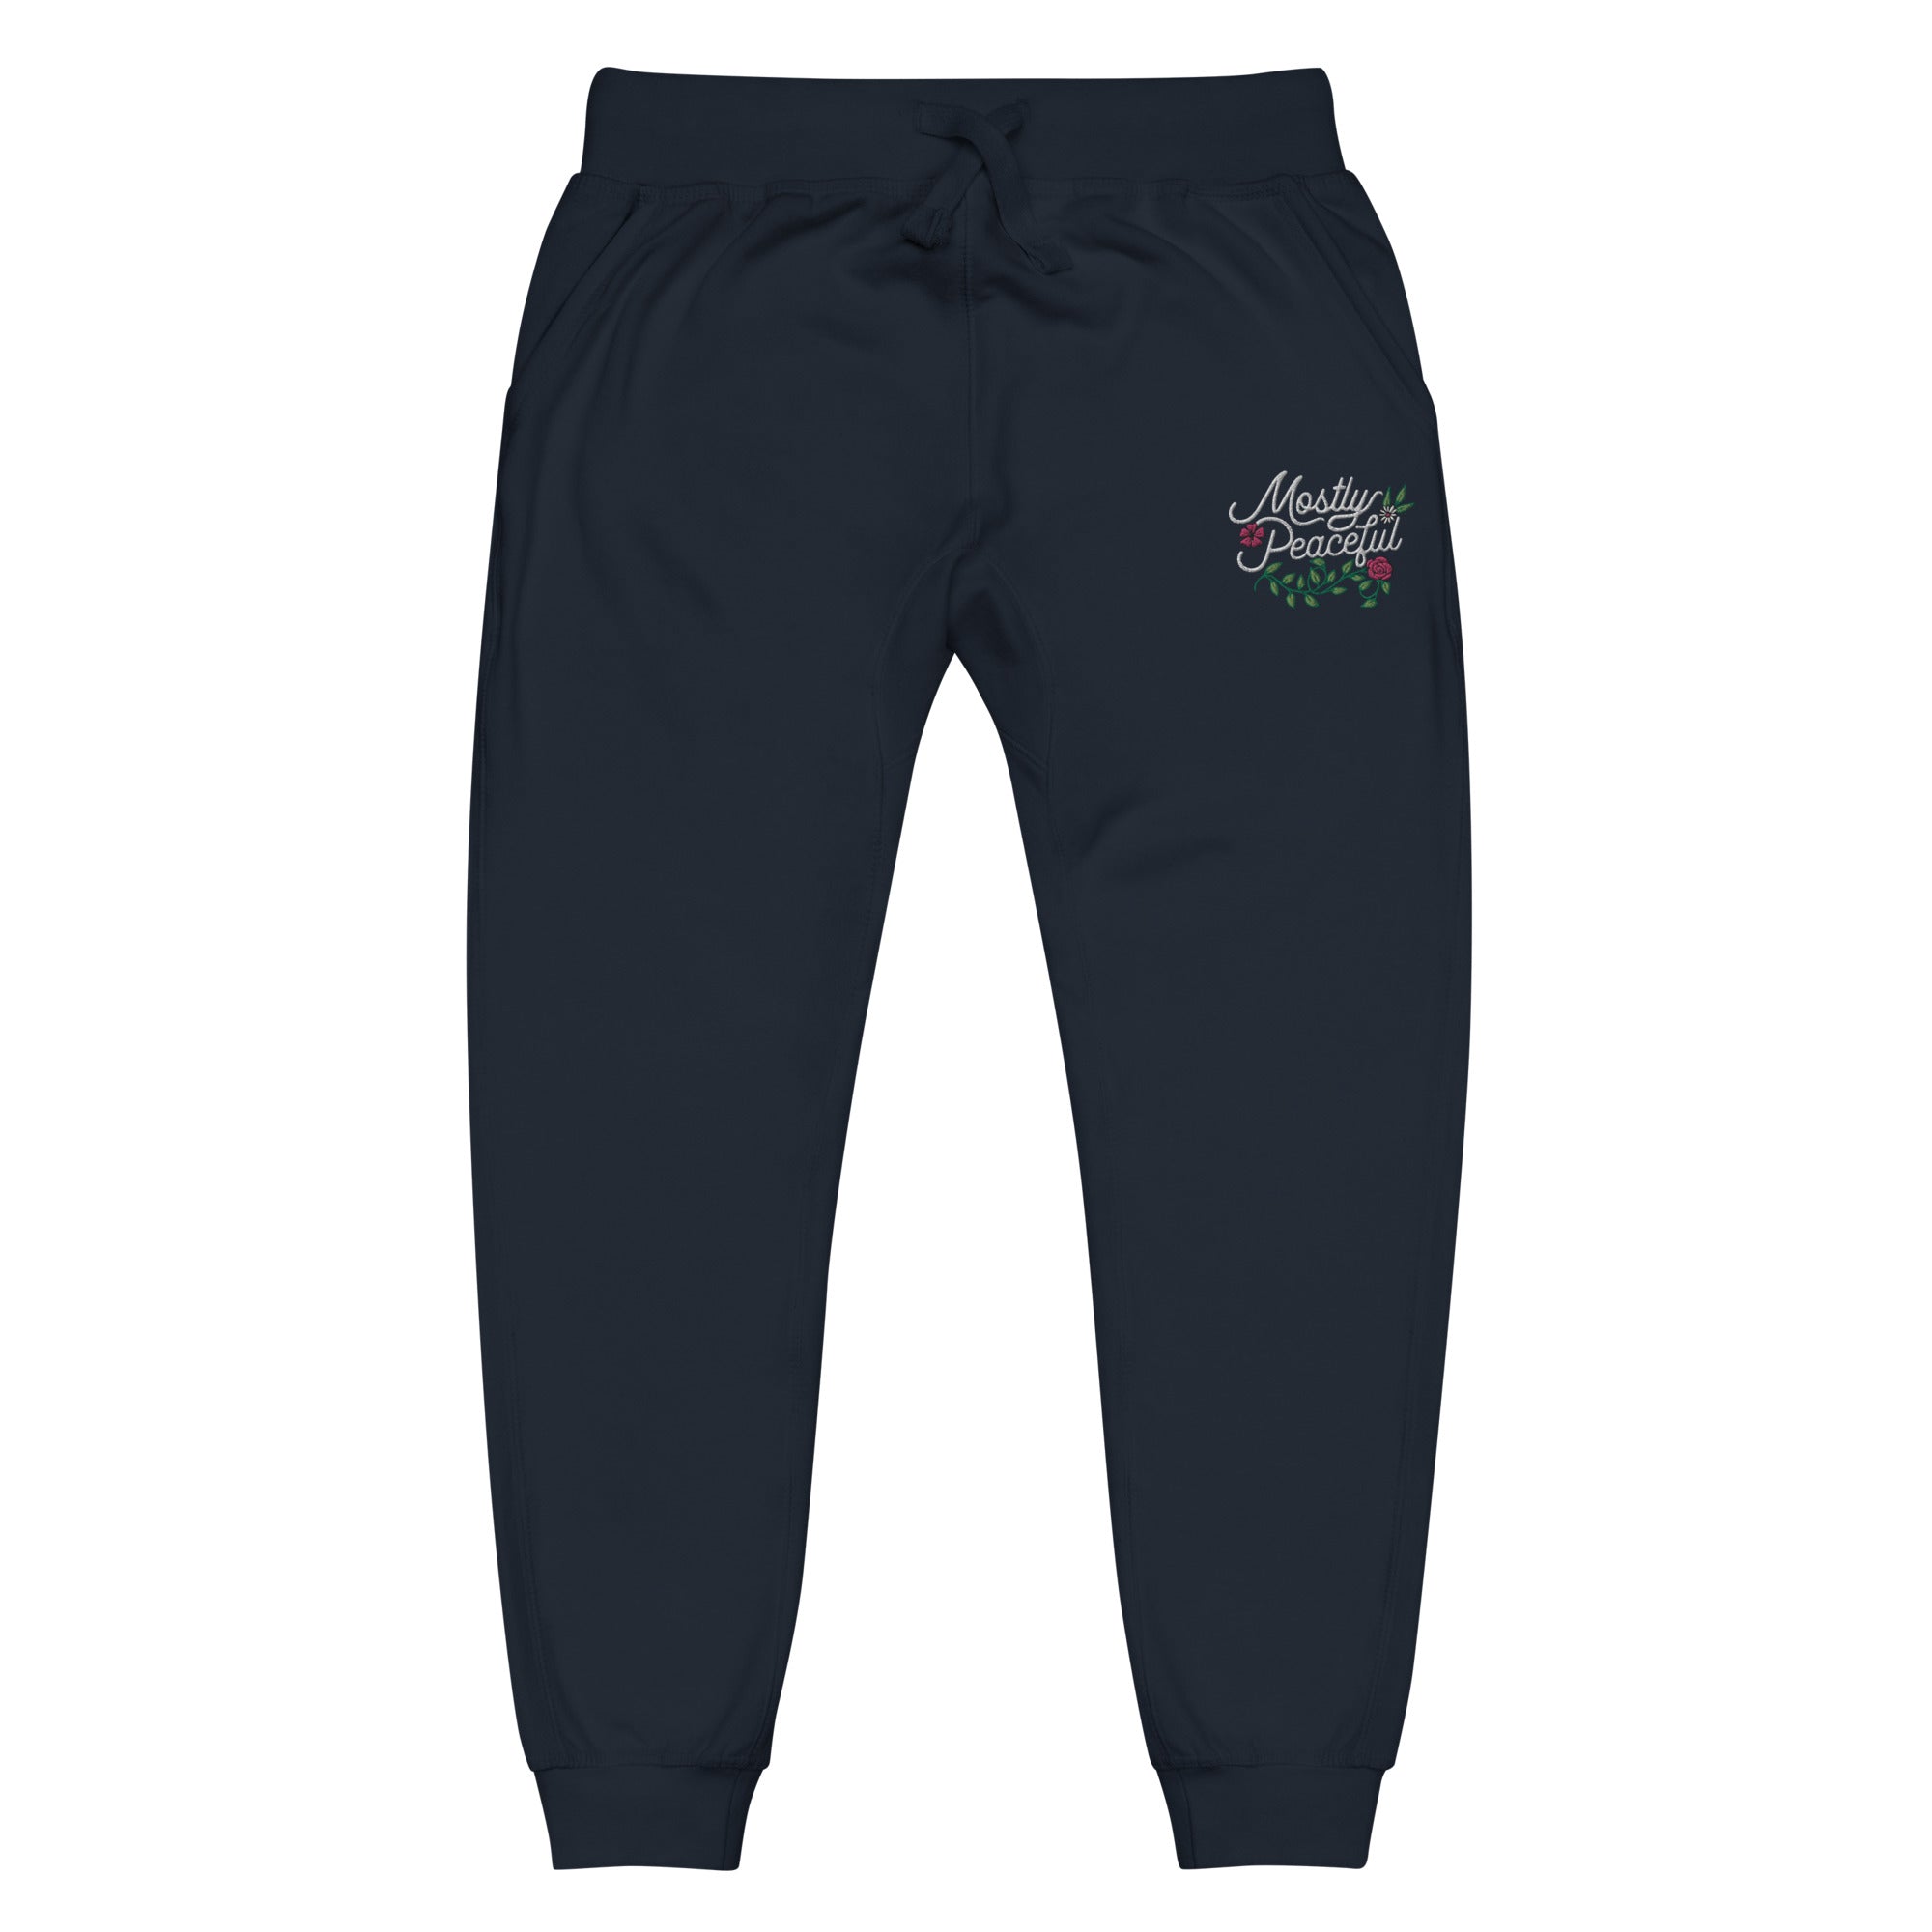 Mostly Peaceful Embroidered Fleeece Sweatpants